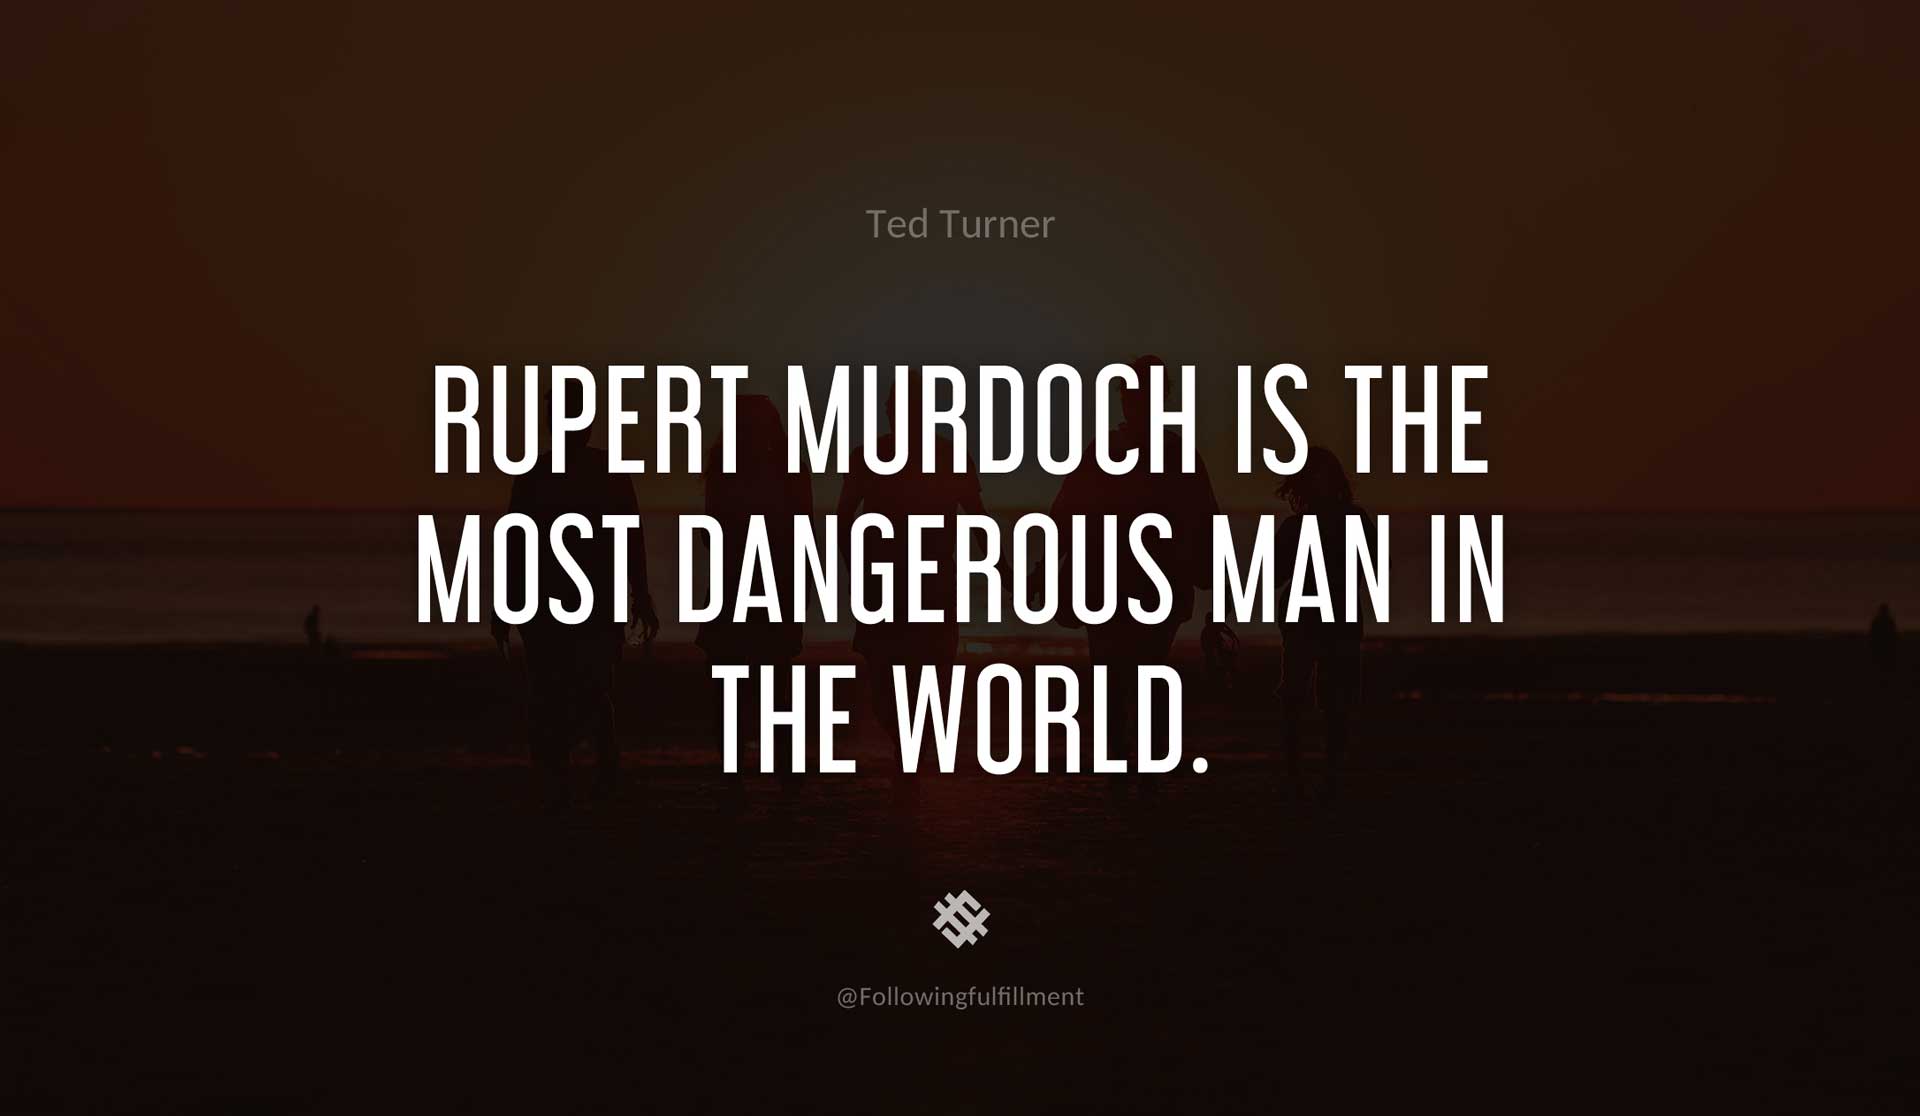 Rupert-Murdoch-is-the-most-dangerous-man-in-the-world.-TED-TURNER-Quote.jpg